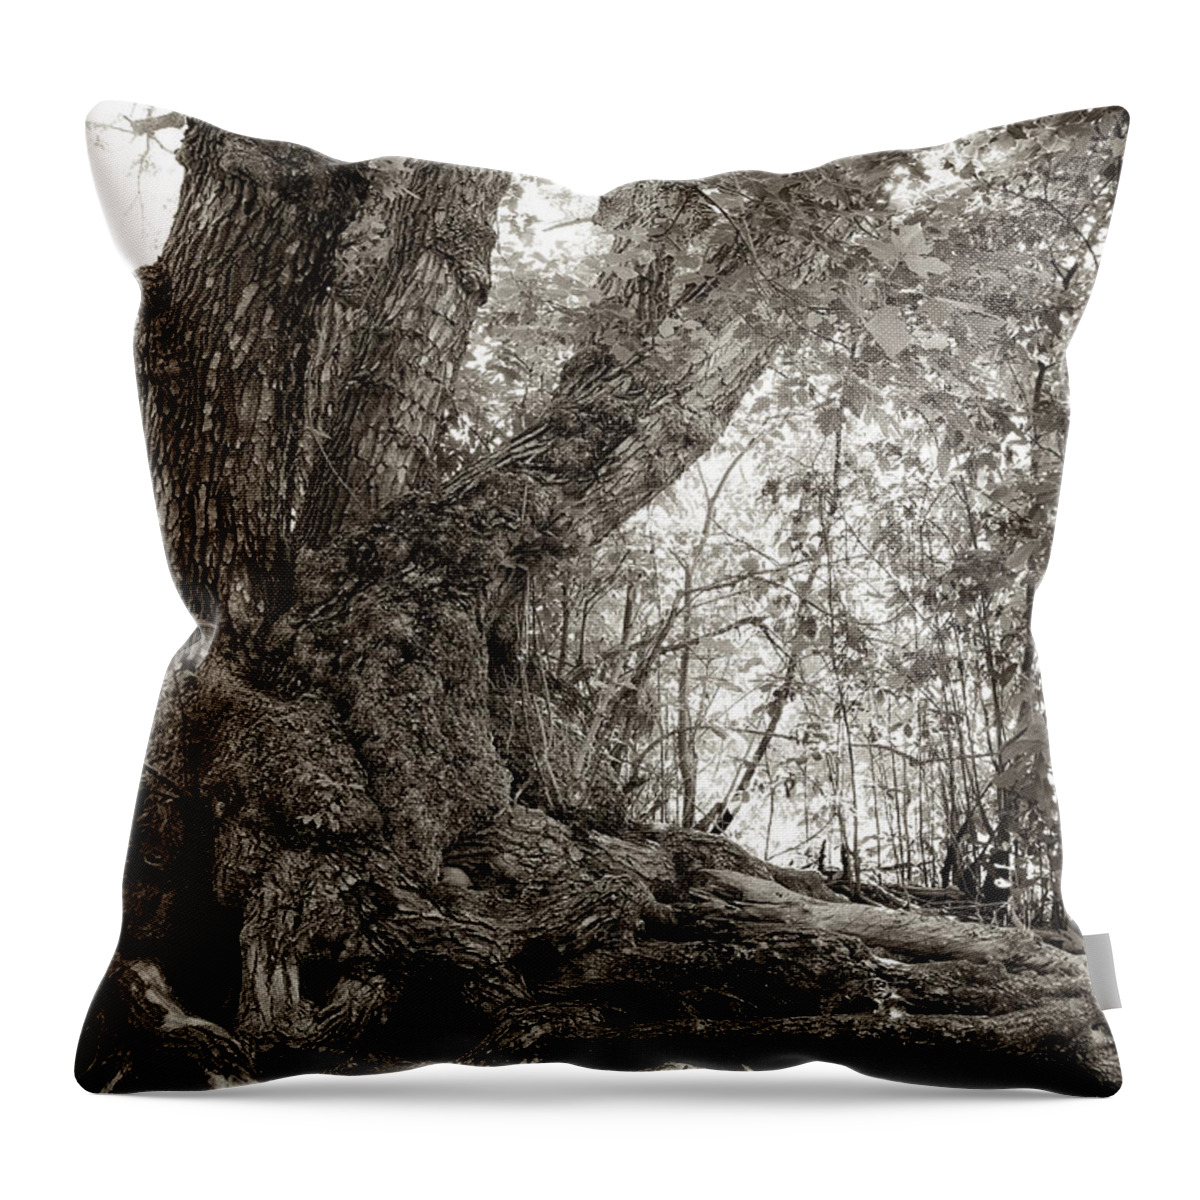 Tree Throw Pillow featuring the photograph Gnarled Tree by Mary Lee Dereske